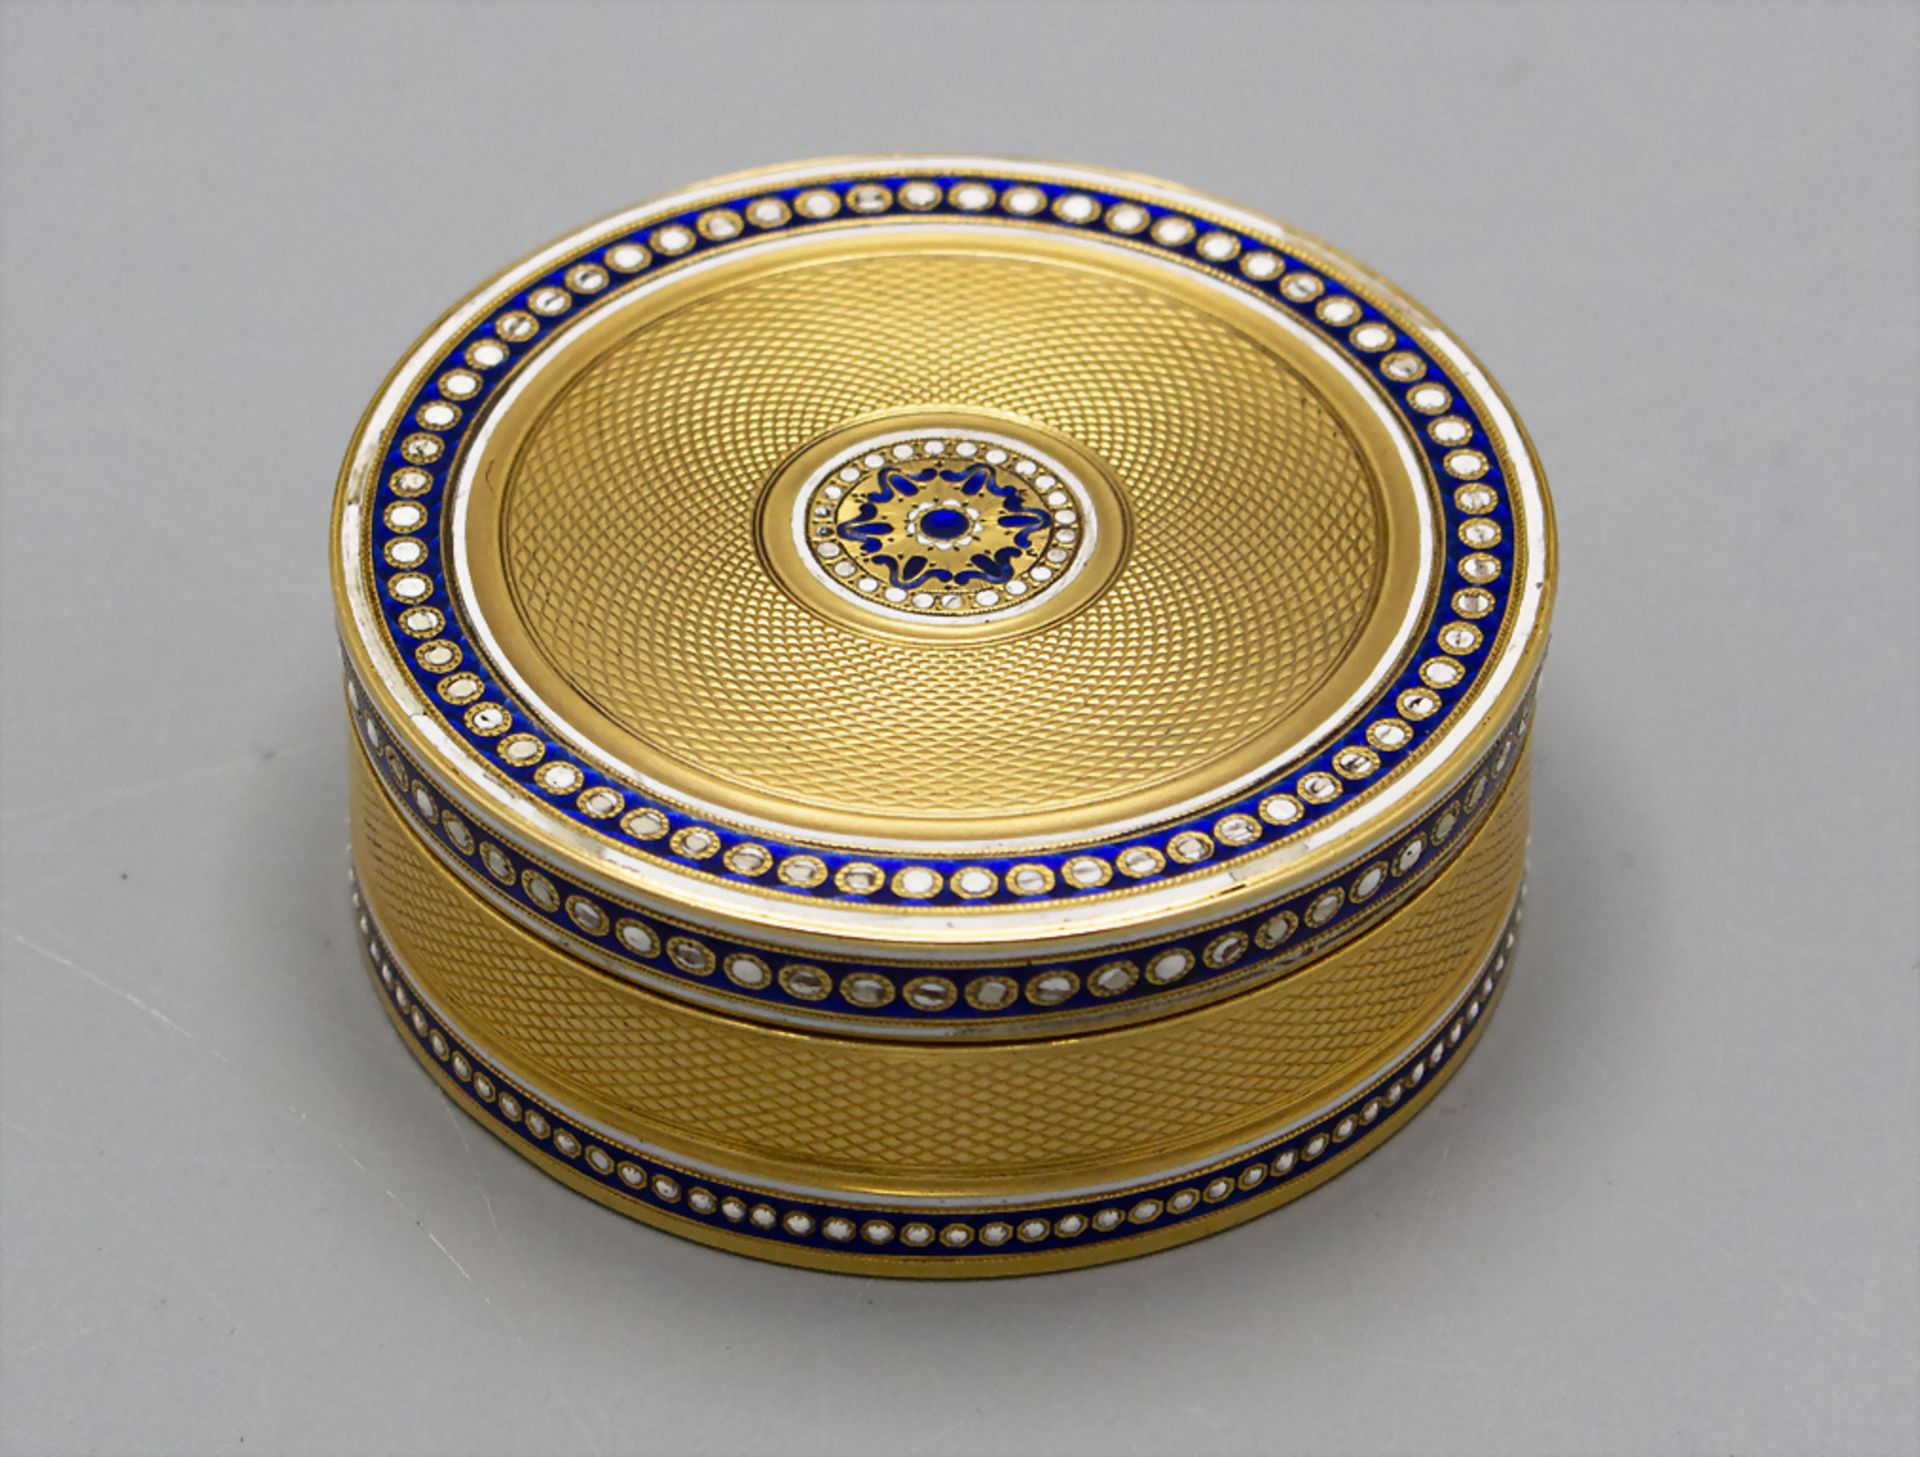 Runde Tabatiere mit Email / Schnupftabakdose / An 18 ct snuff box with enamel, Joseph-Etienne ...